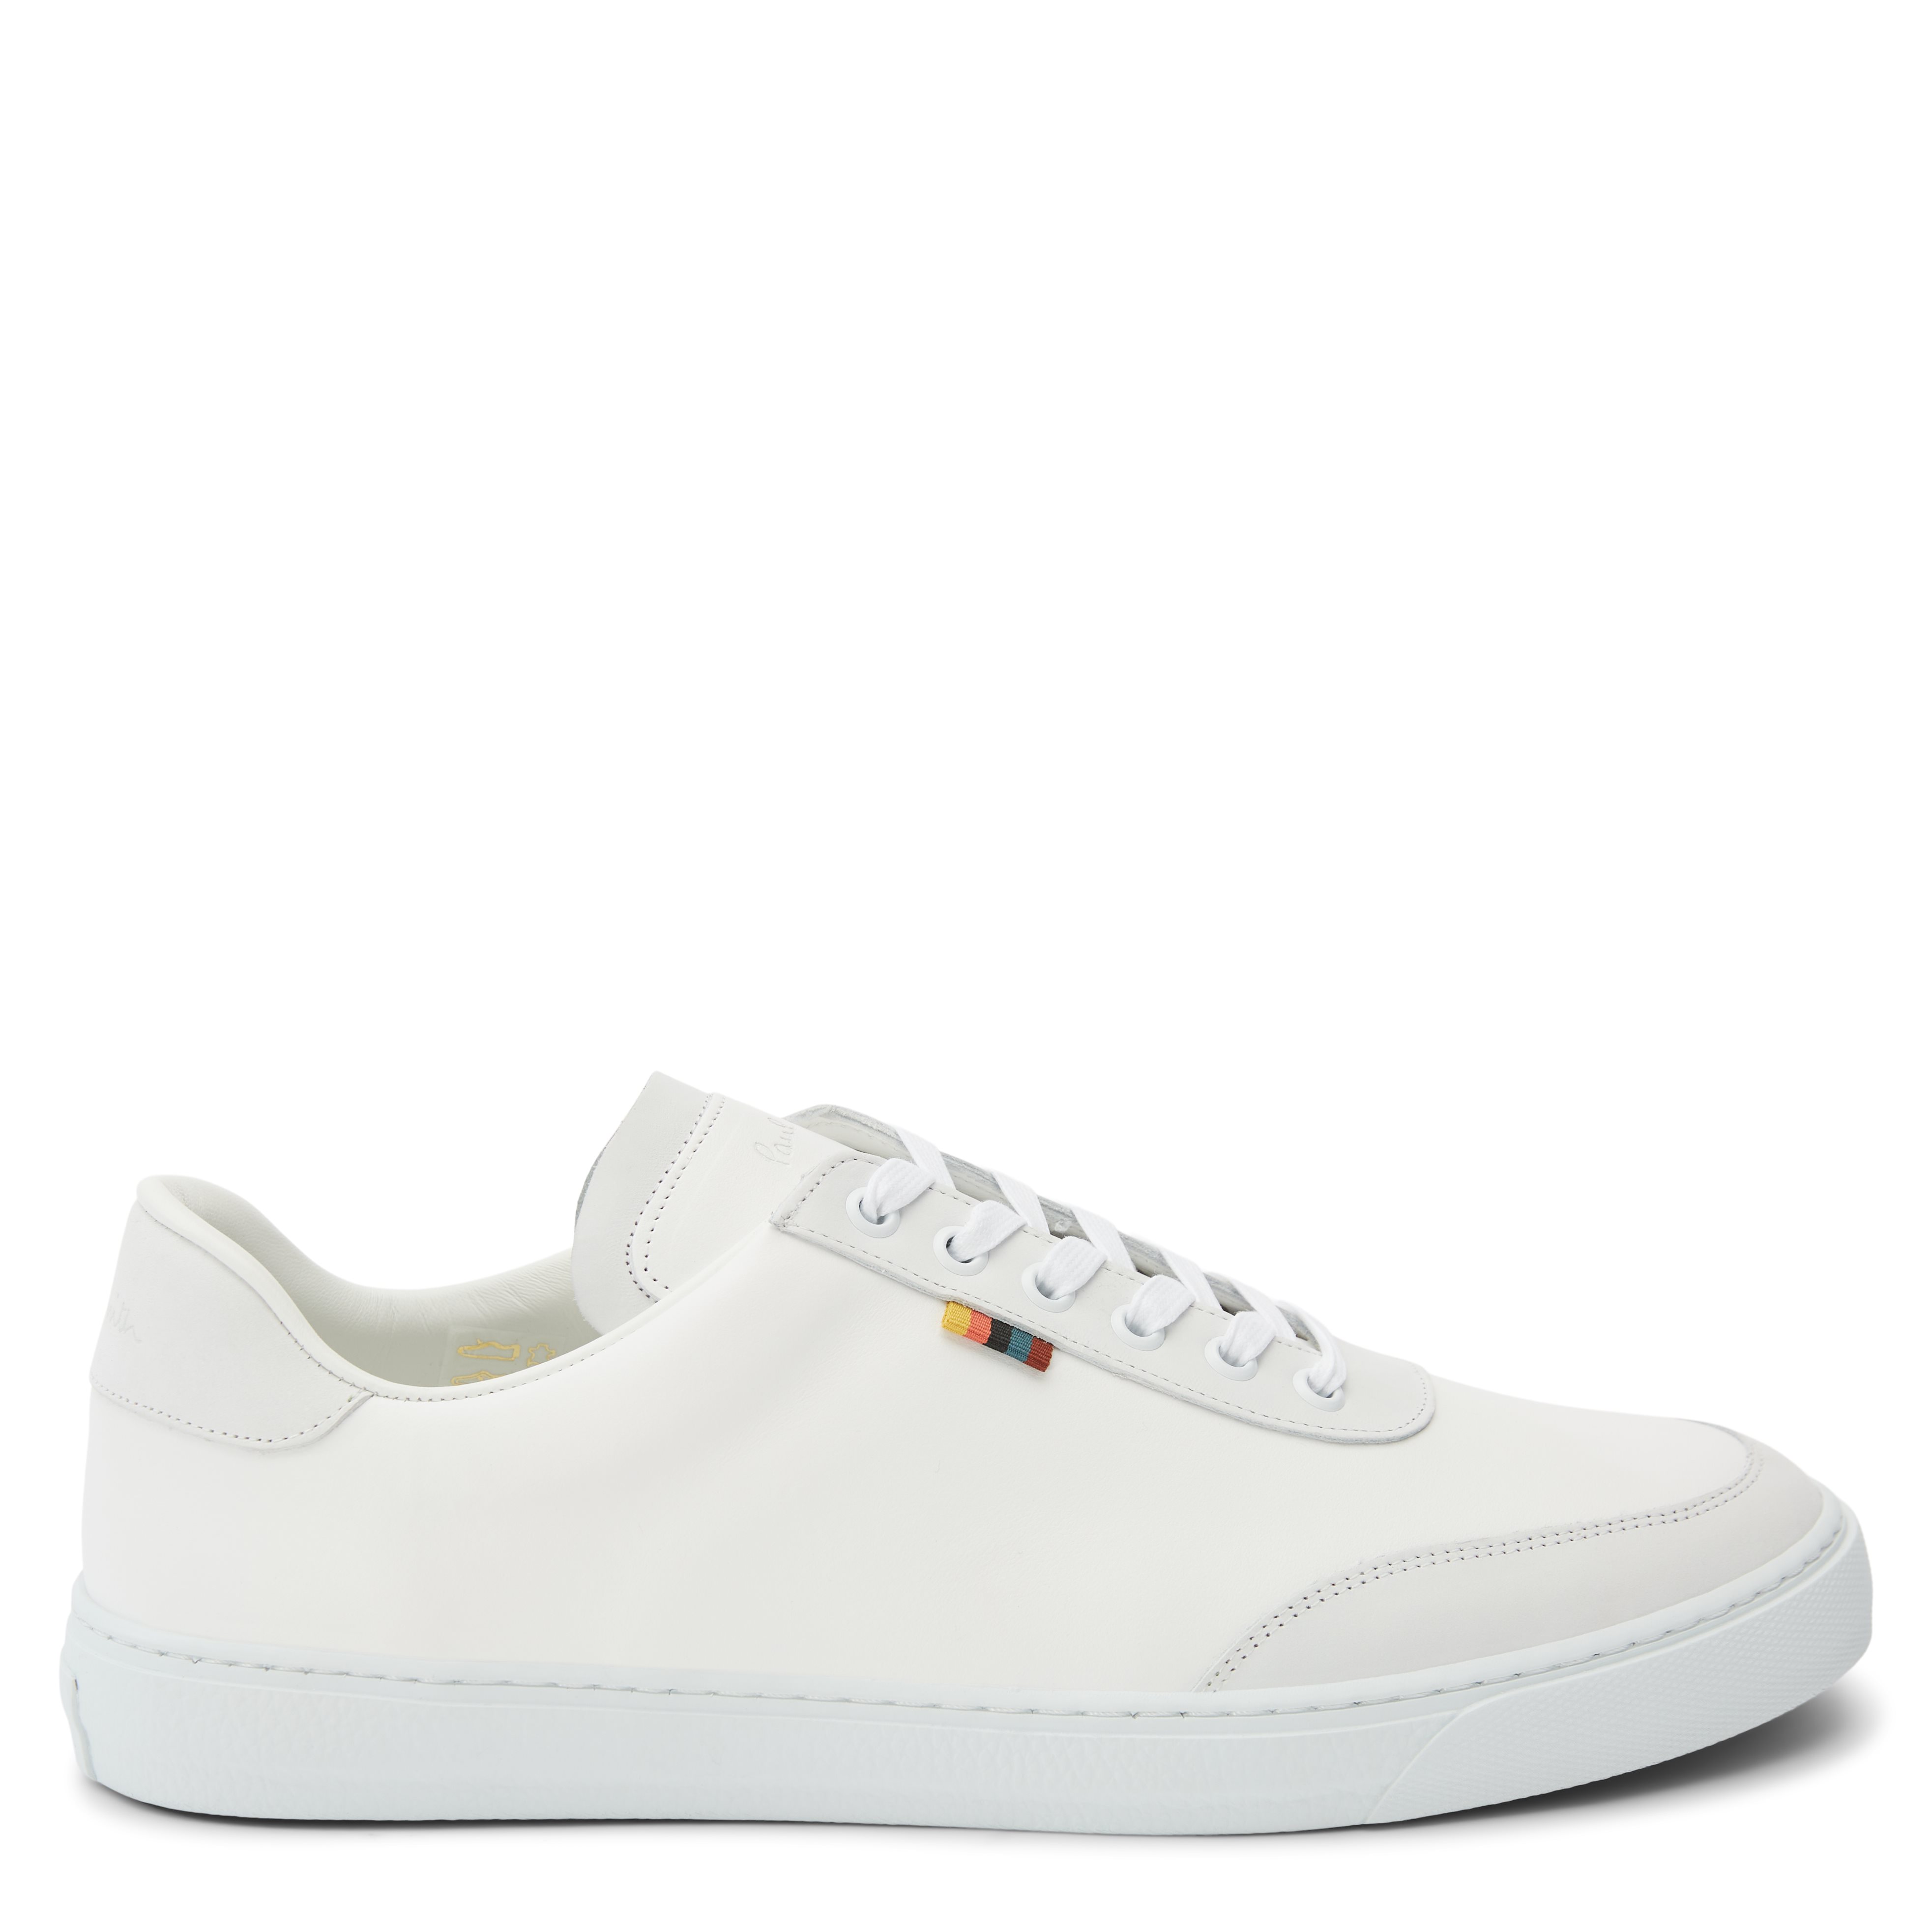 Paul Smith Shoes Shoes GIV01 KMOLV GIVENS White